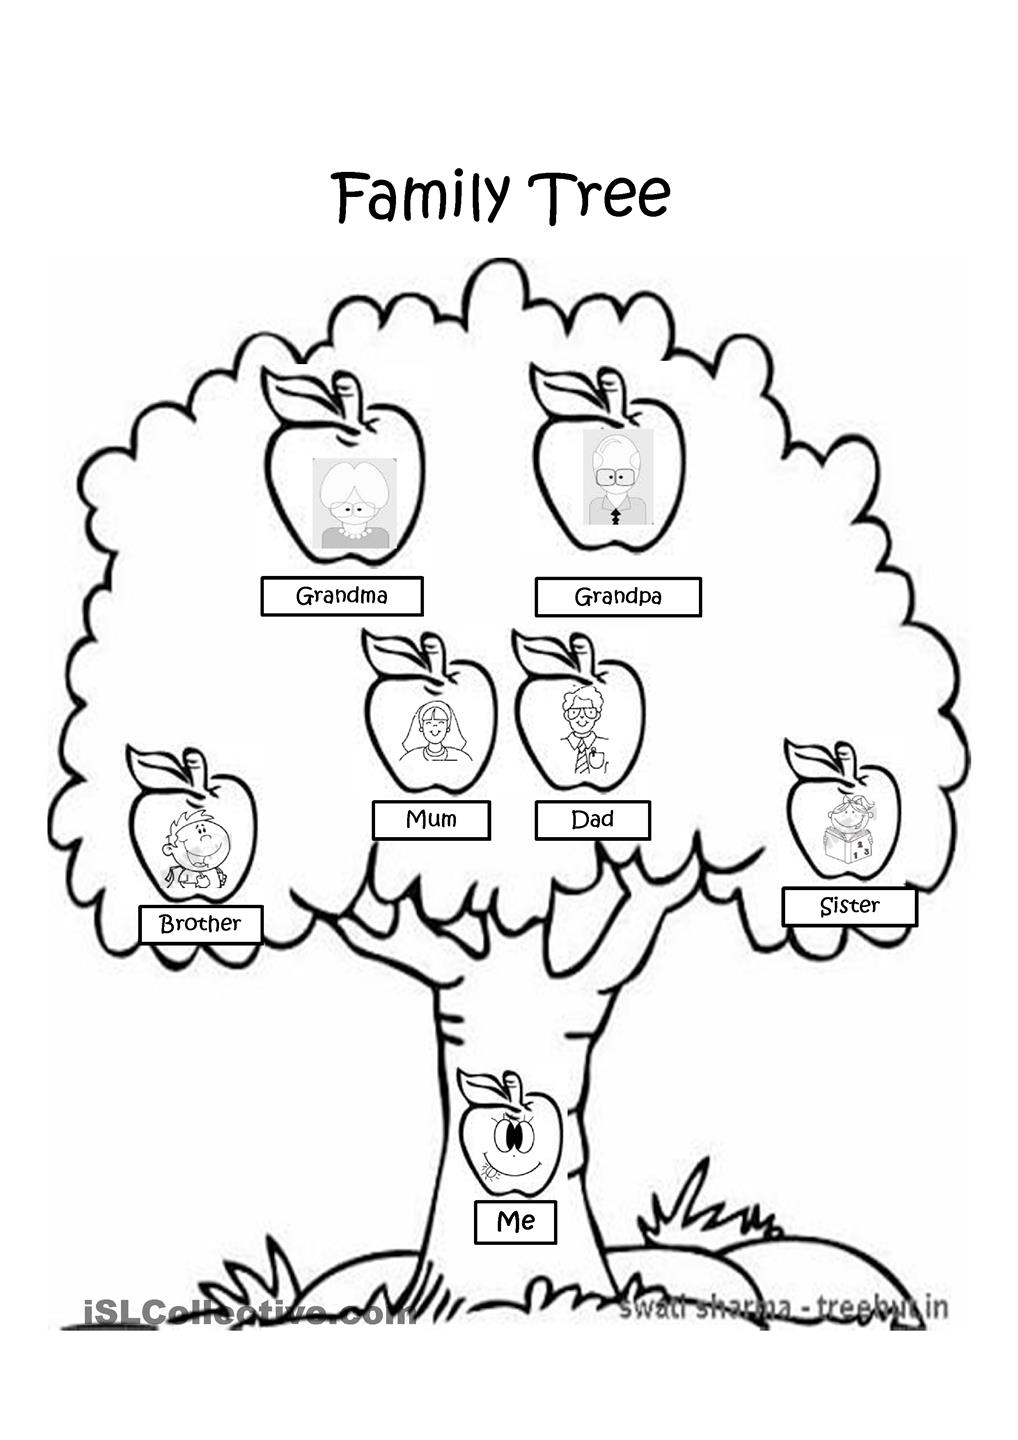 family-tree-drawing-for-kids-clip-art-library